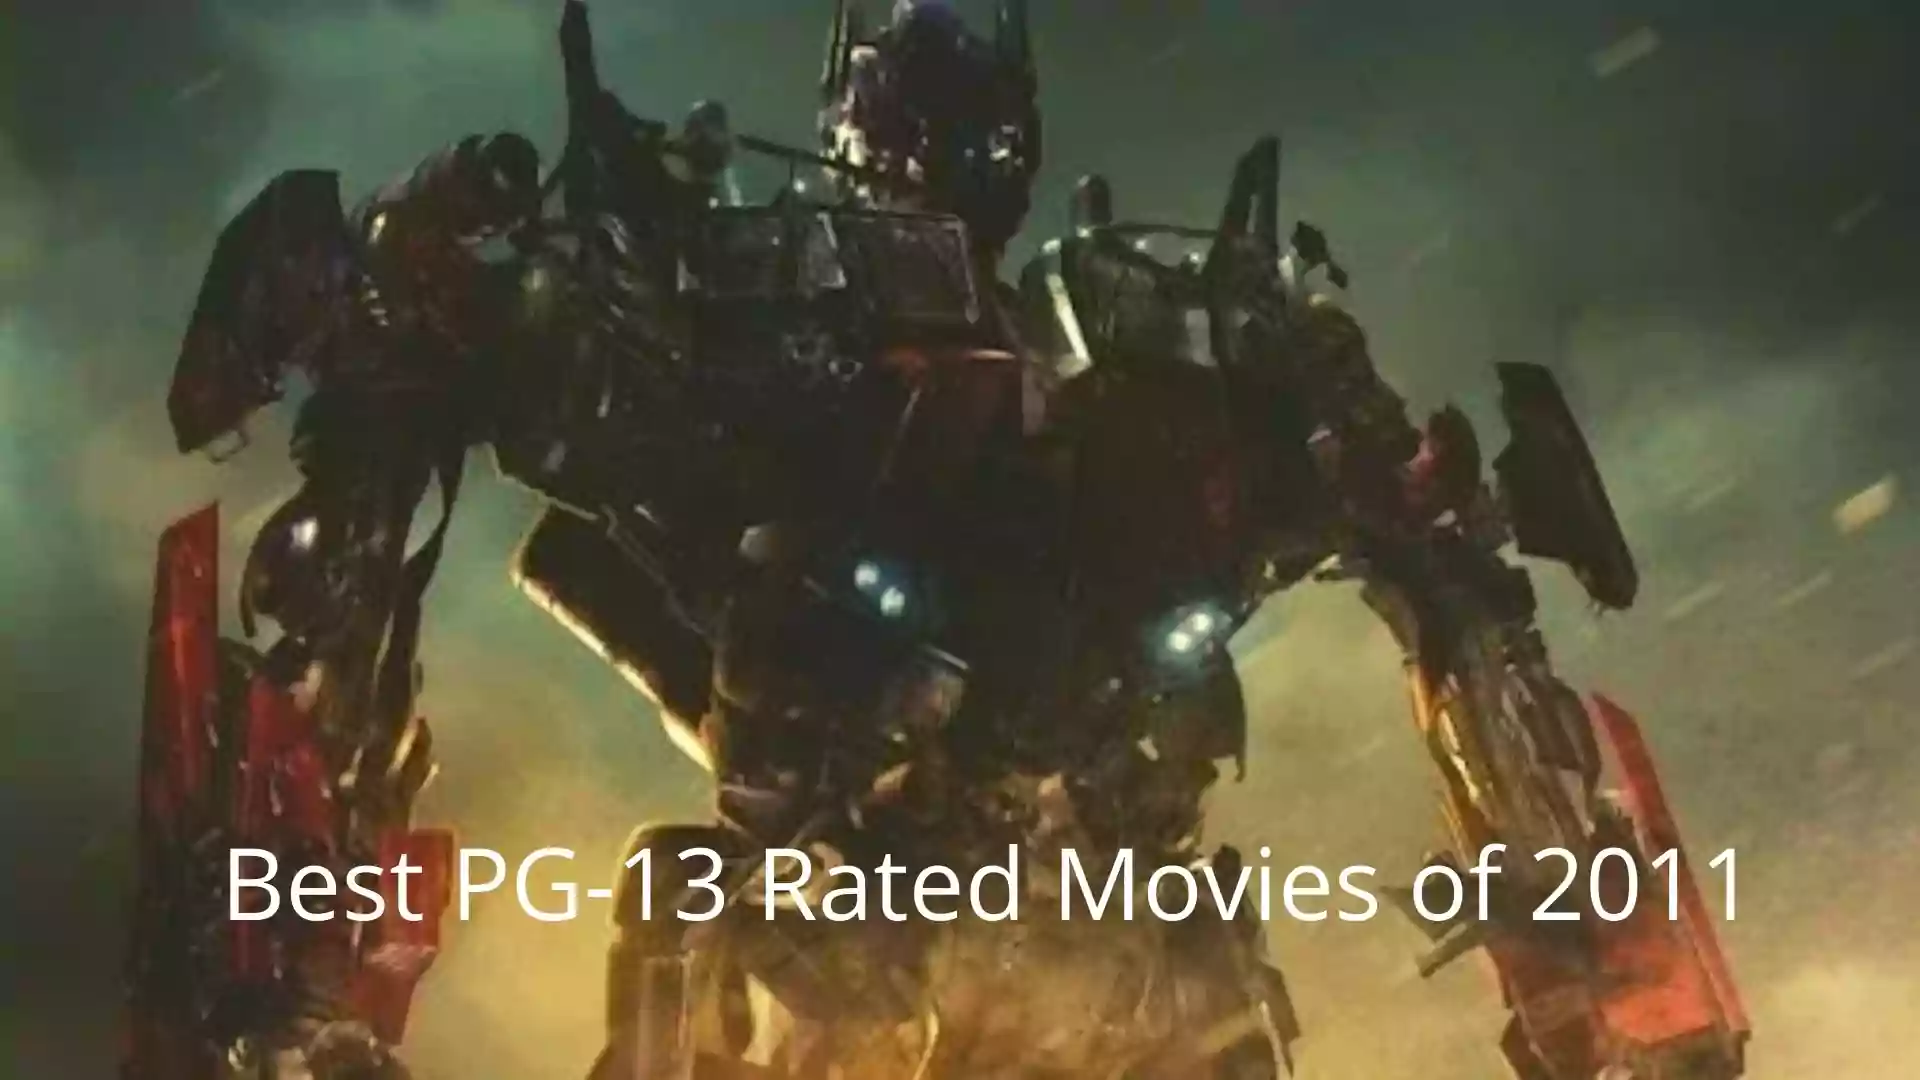 Best PG-13 Rated Movies of 2011